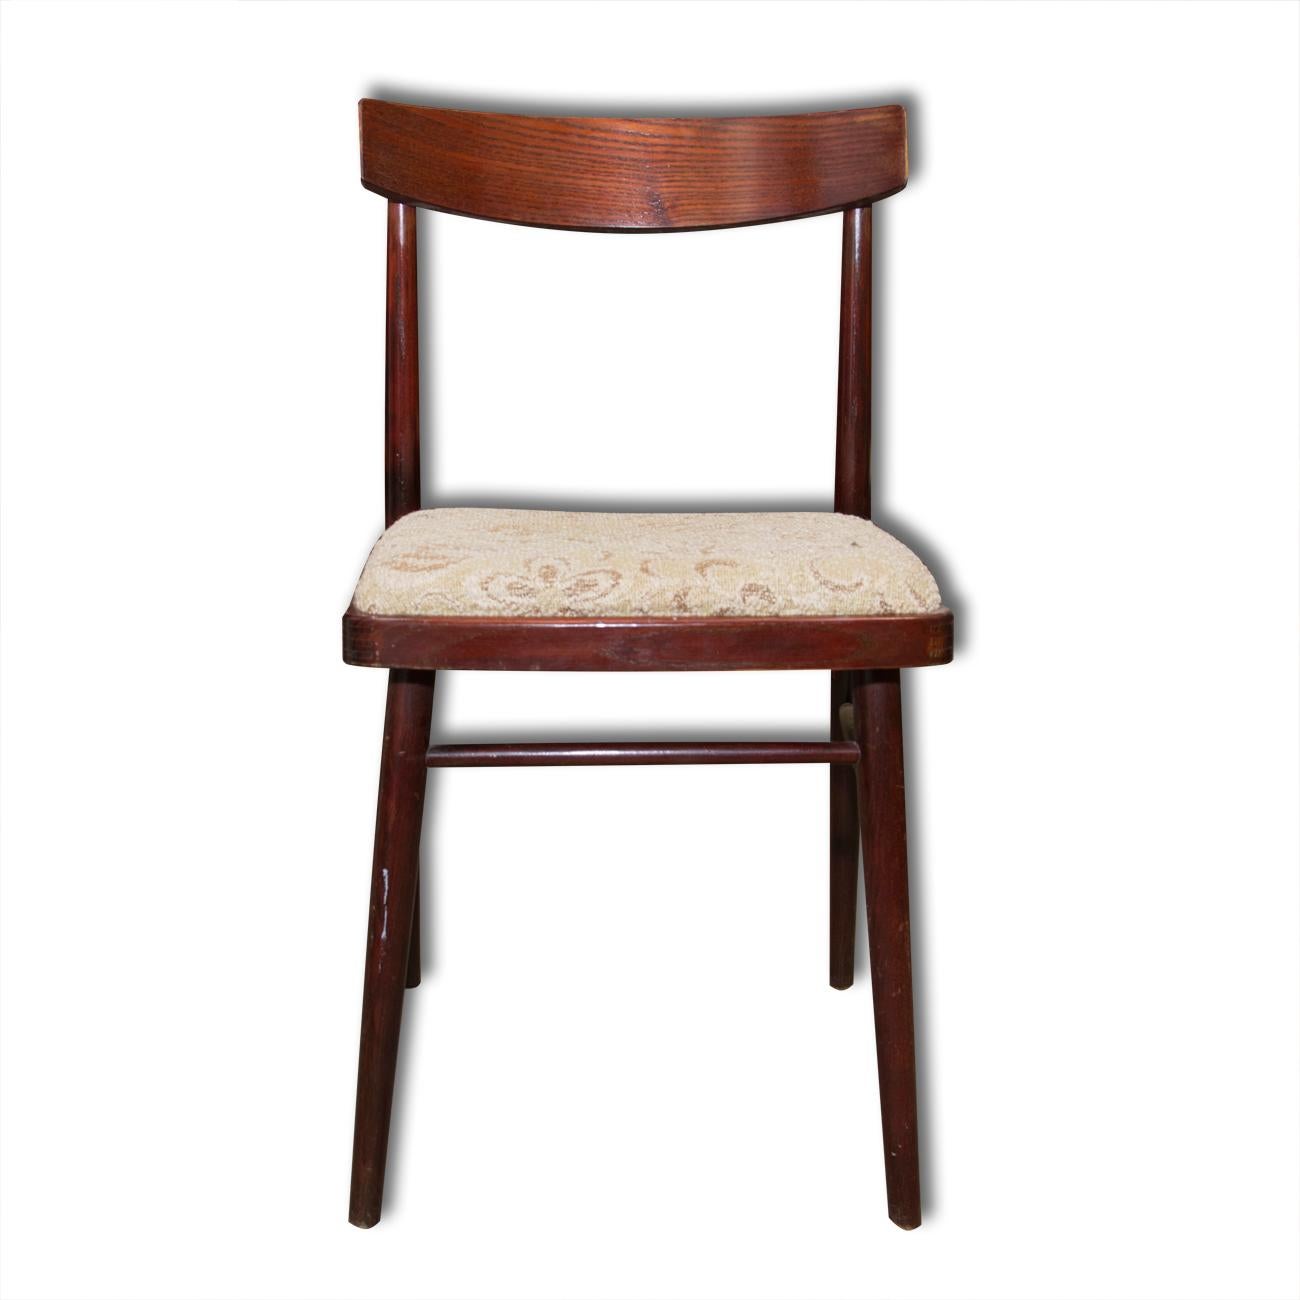 Vintage Czechoslovak upholstered dining chairs, set of four. Made in Czechoslovakia in the 1970s and produced by JITONA. In good vintage condition. Plywood corpus with polished beech mahogany wood. Traces of wear and tear commensurate with age, it